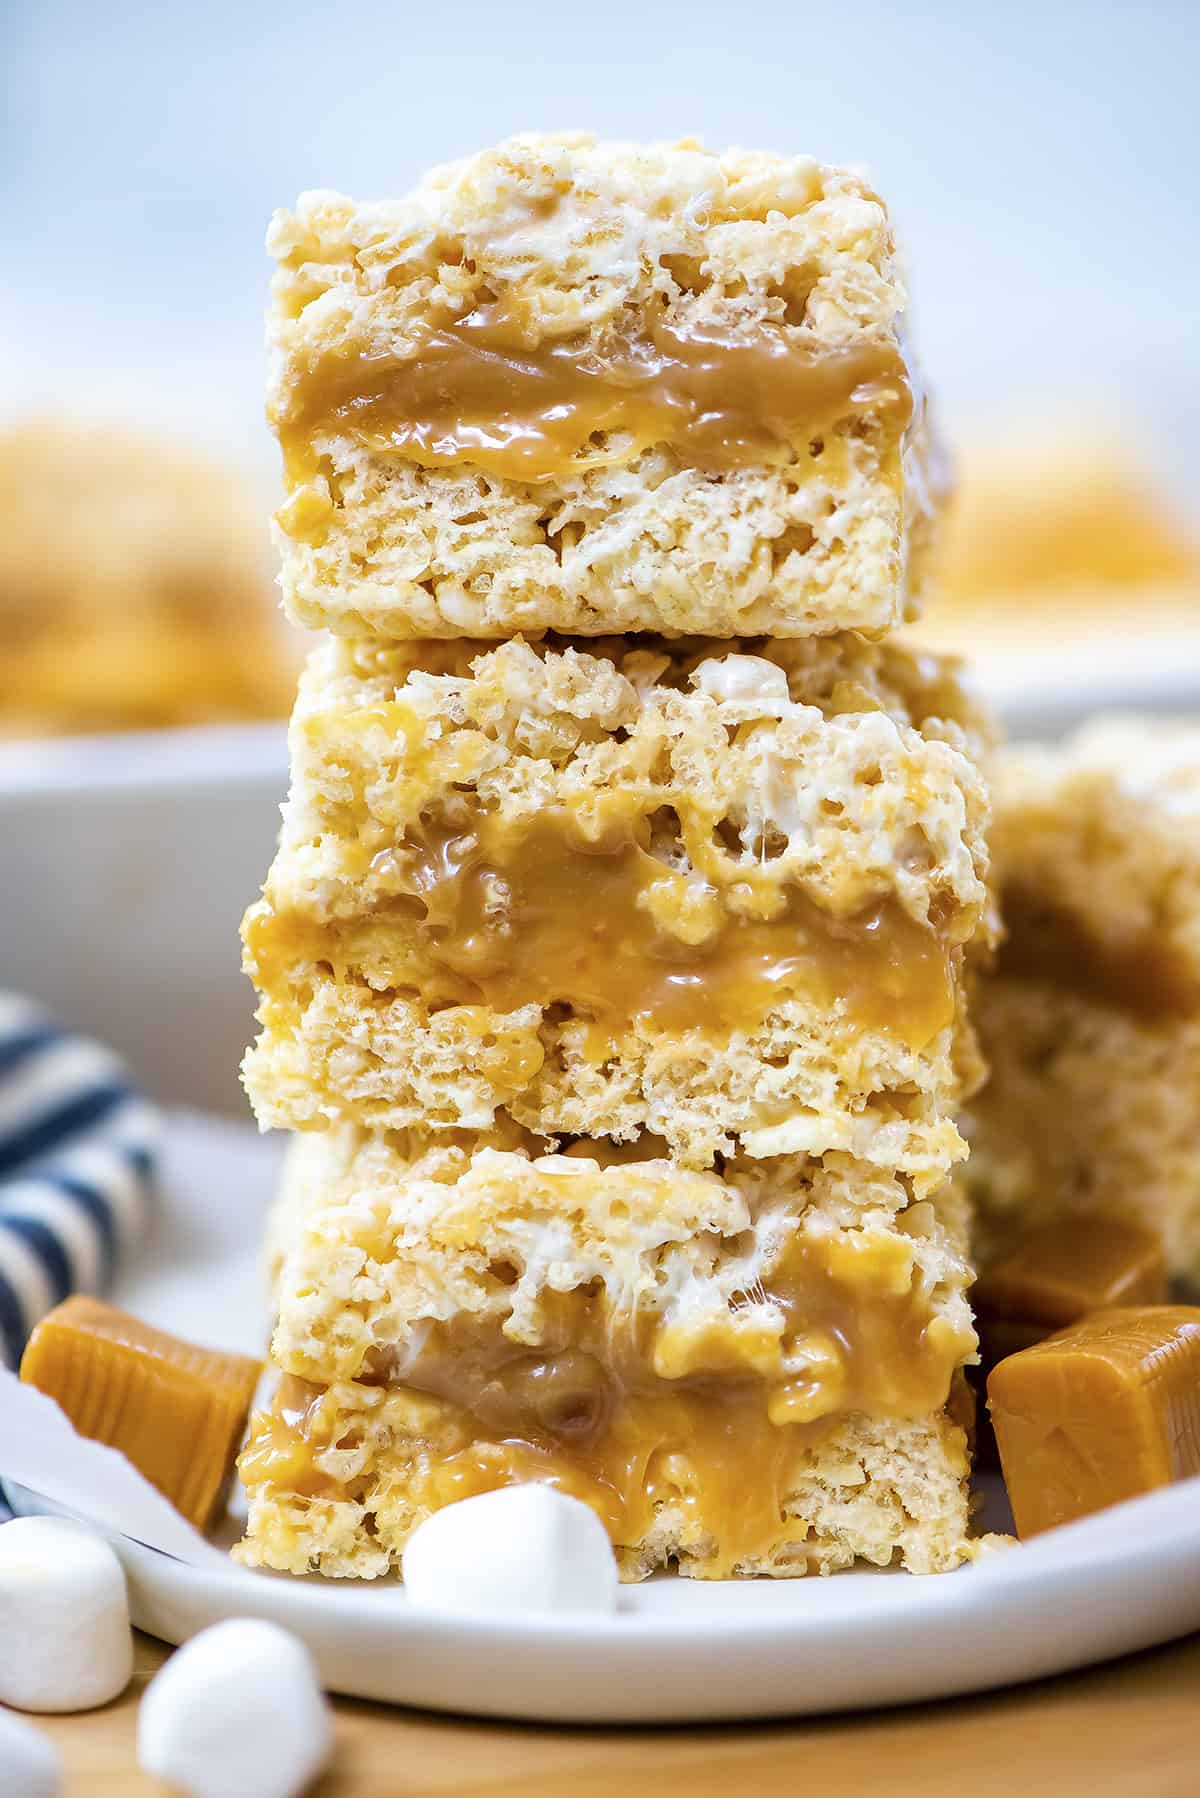 Stack of caramel rice krispies treats on plate.